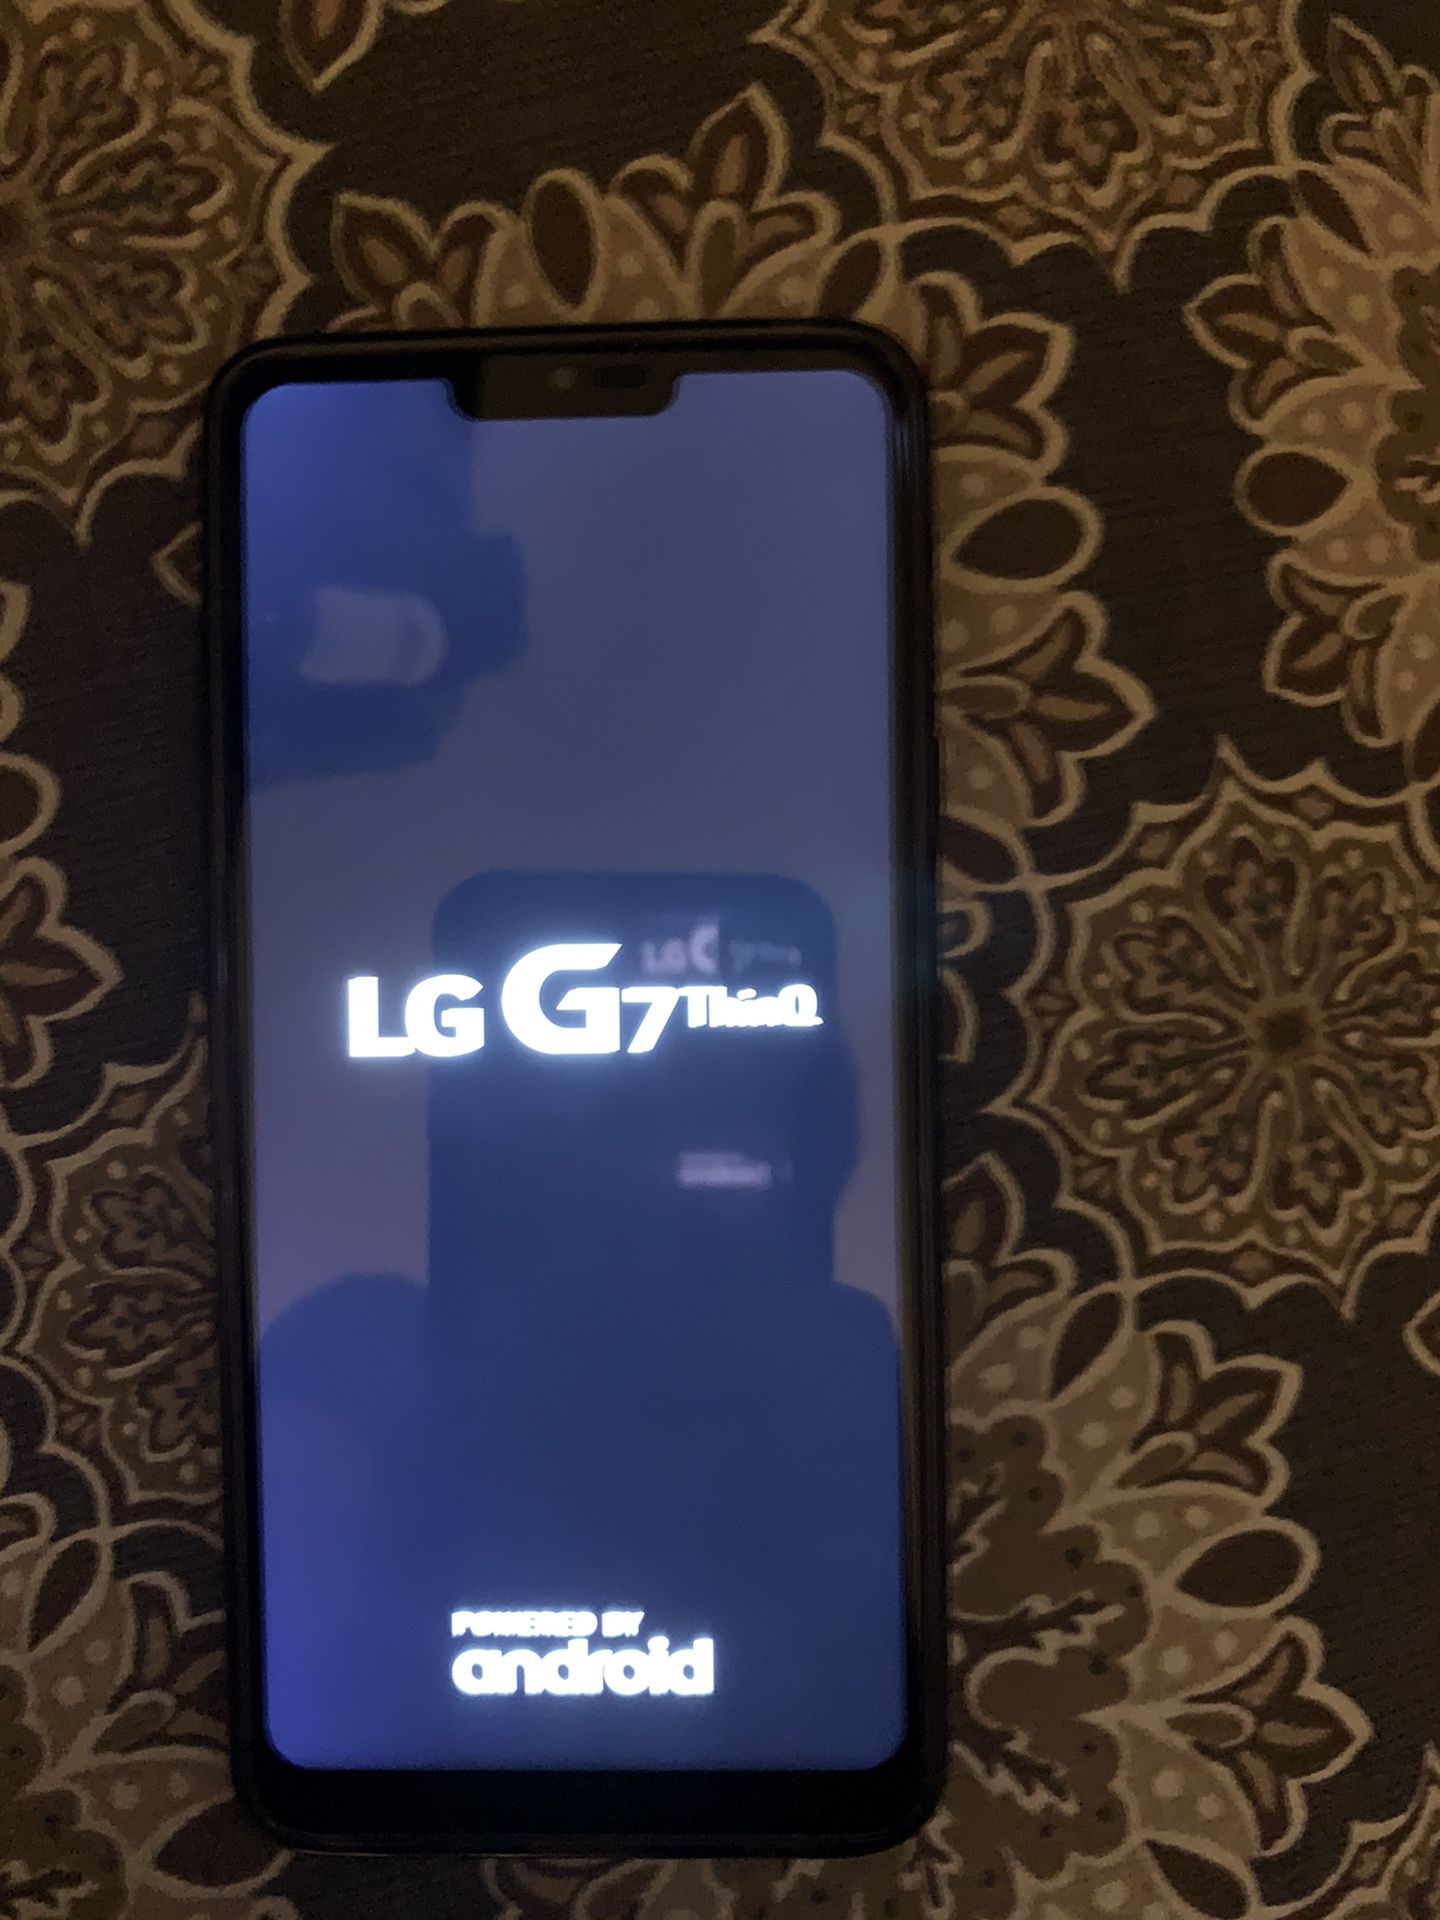 LG G7 thinQ Android phone great condition